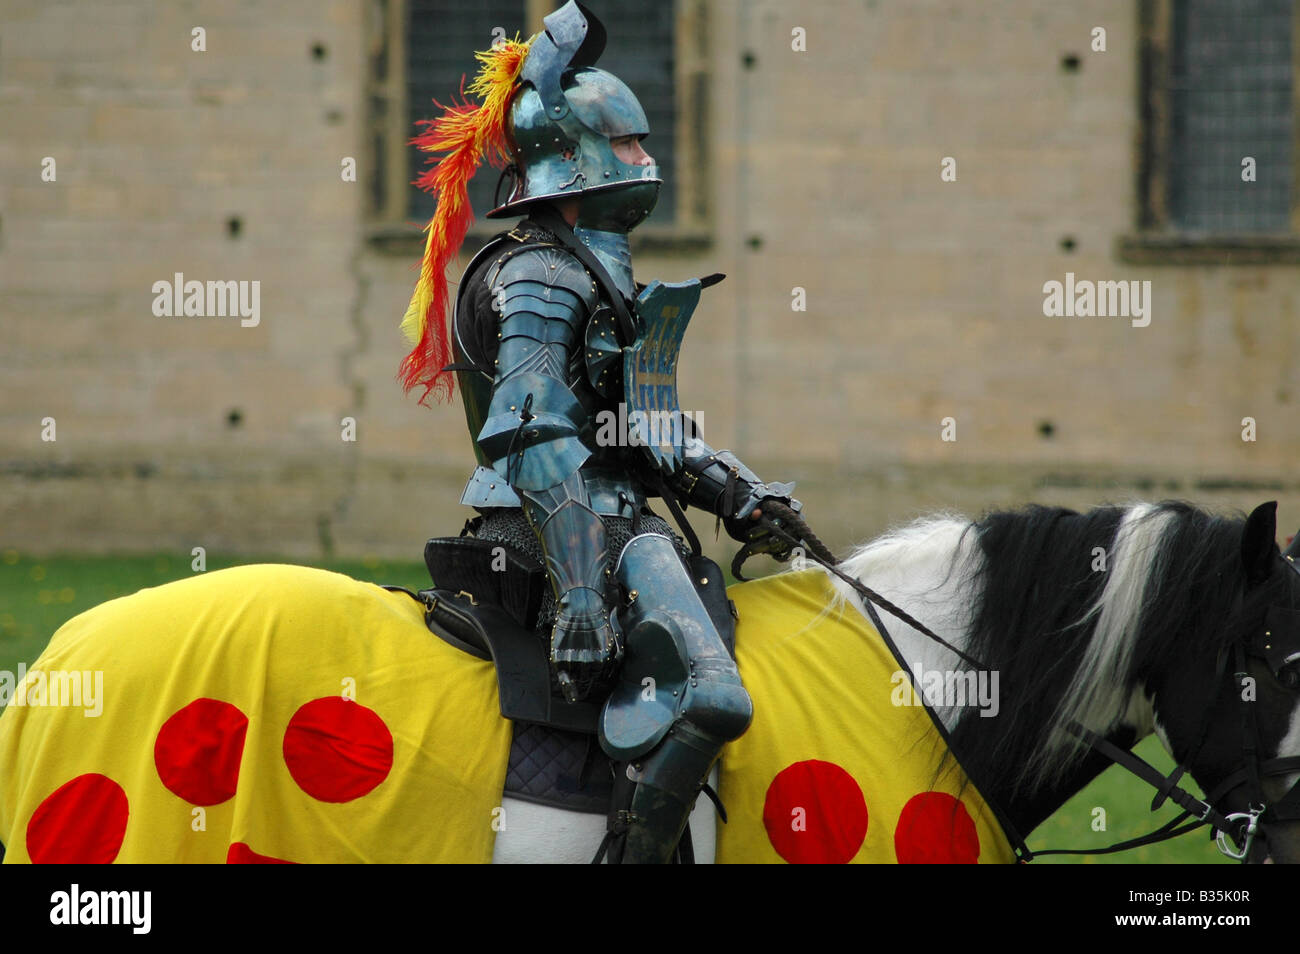 Knight in armour mounted on horse Stock Photo